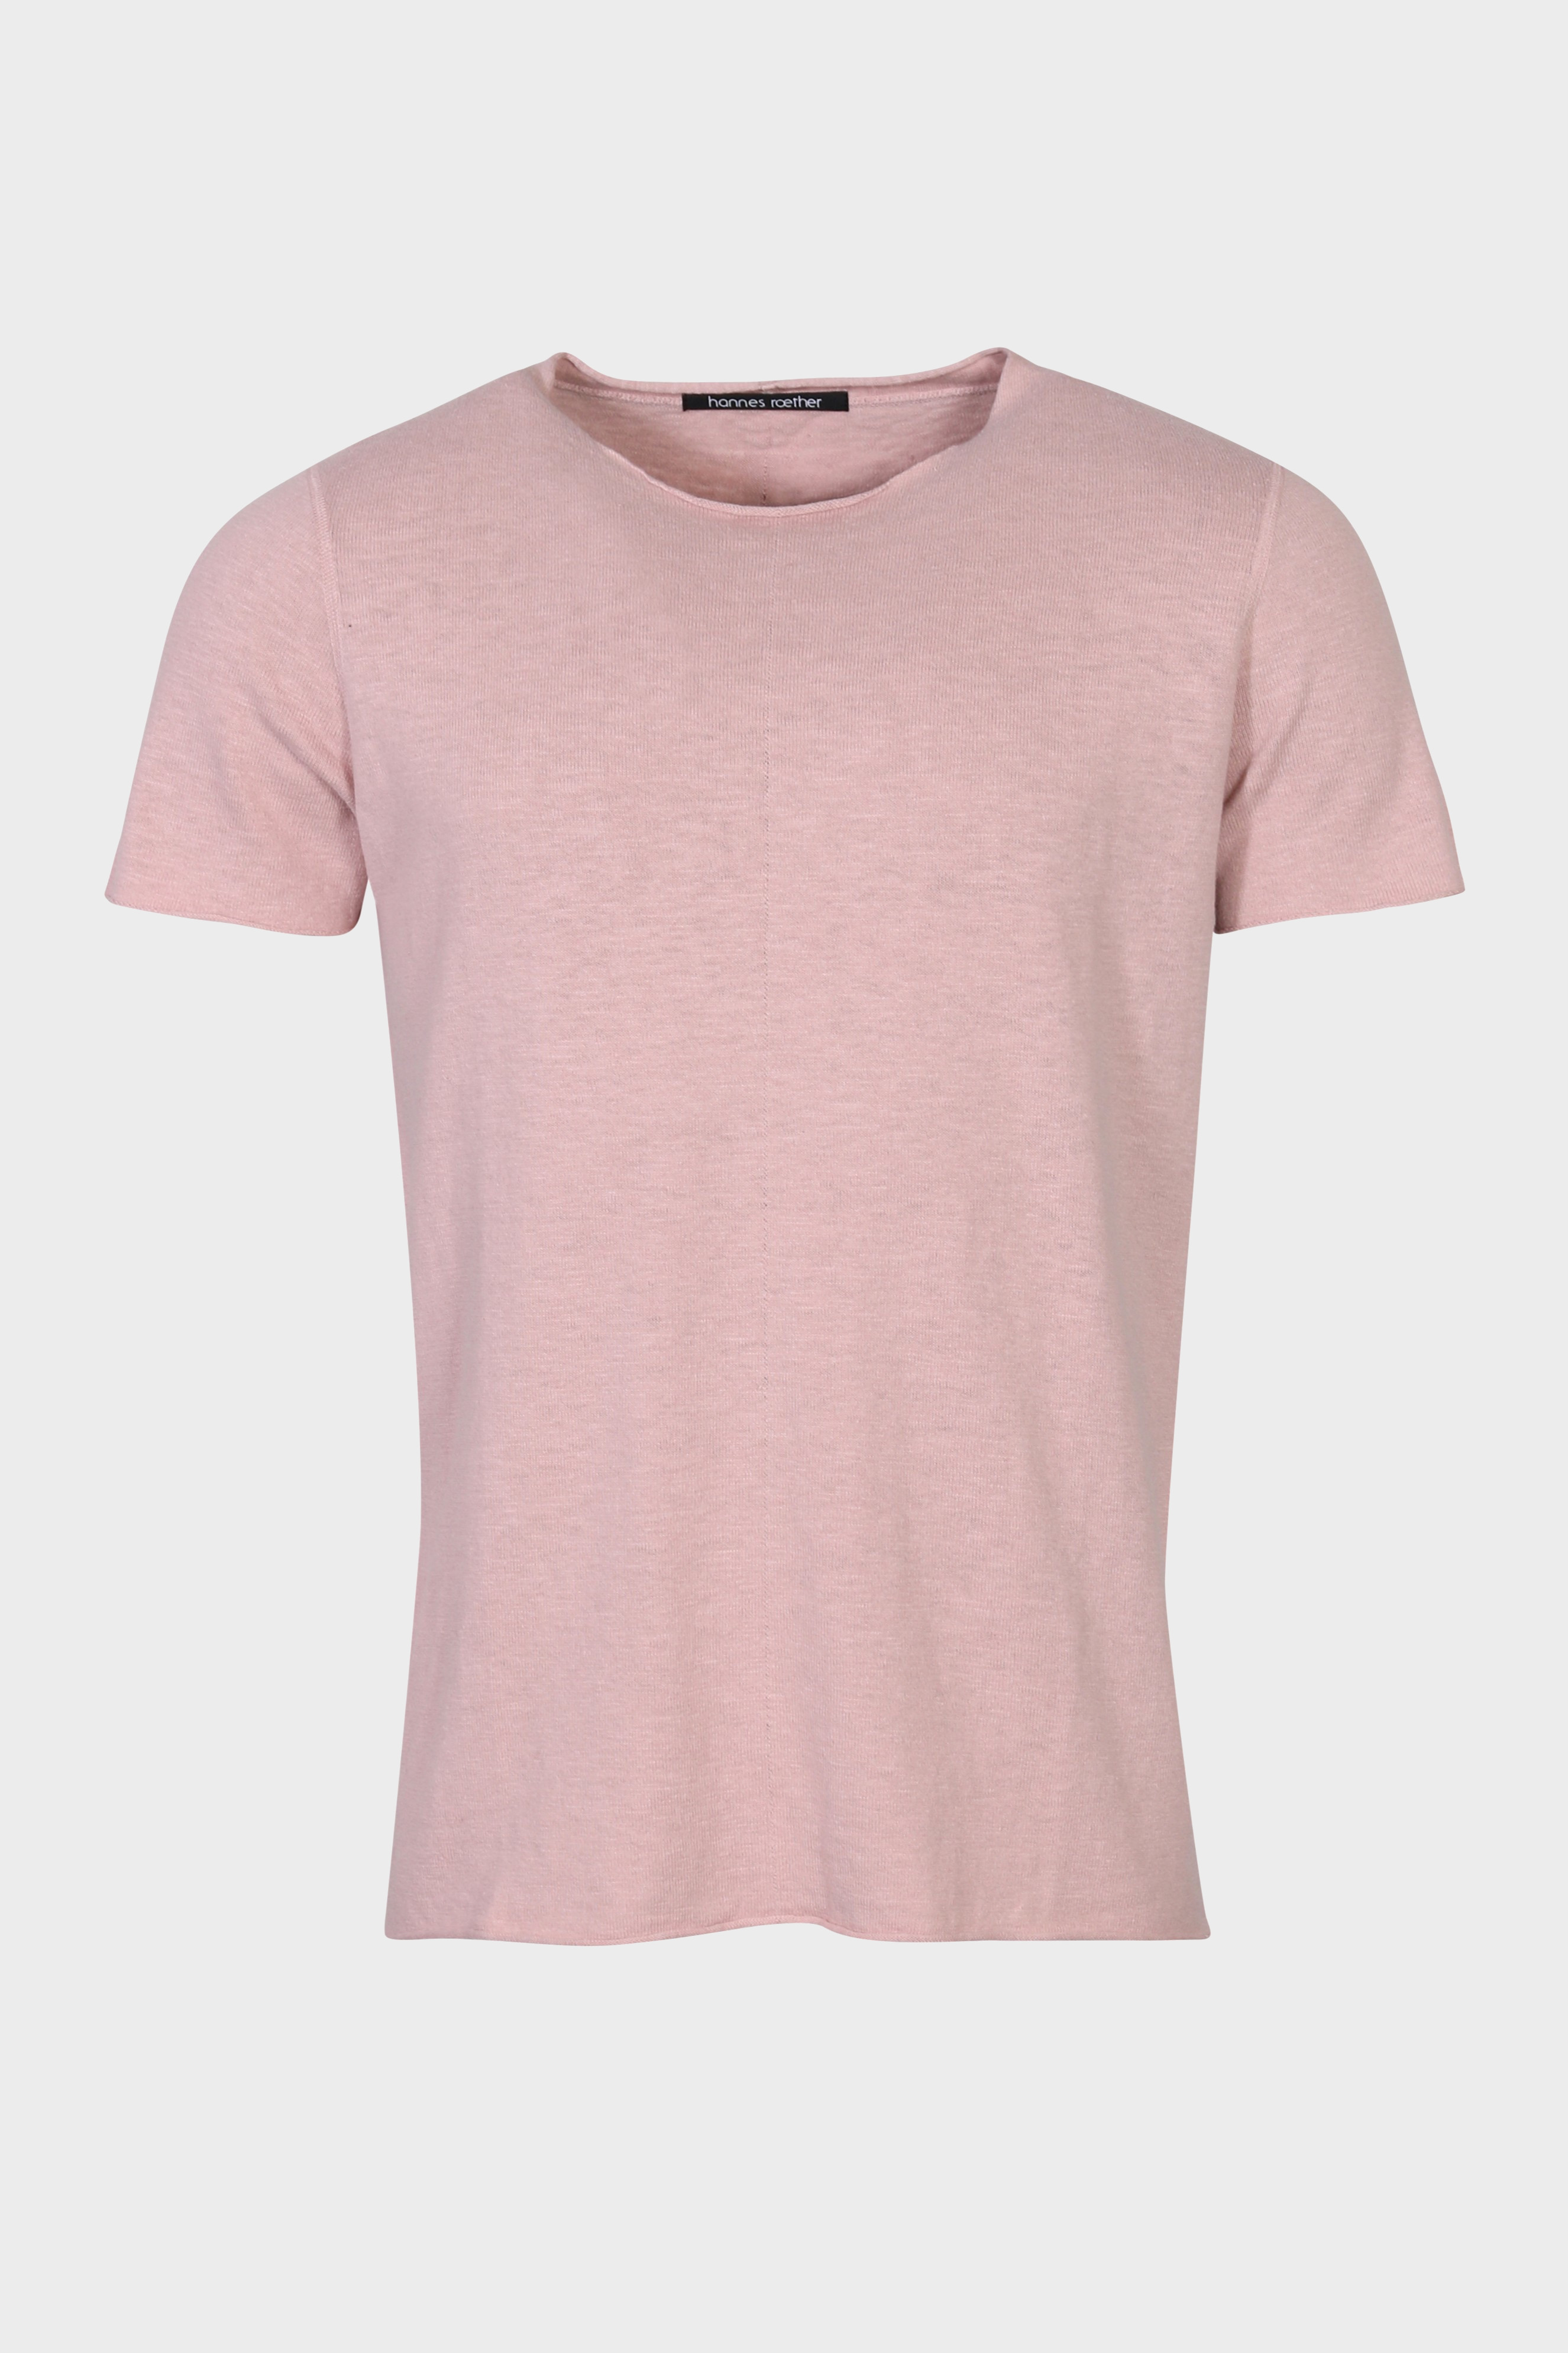 HANNES ROETHER Knit T-Shirt in Light Pink